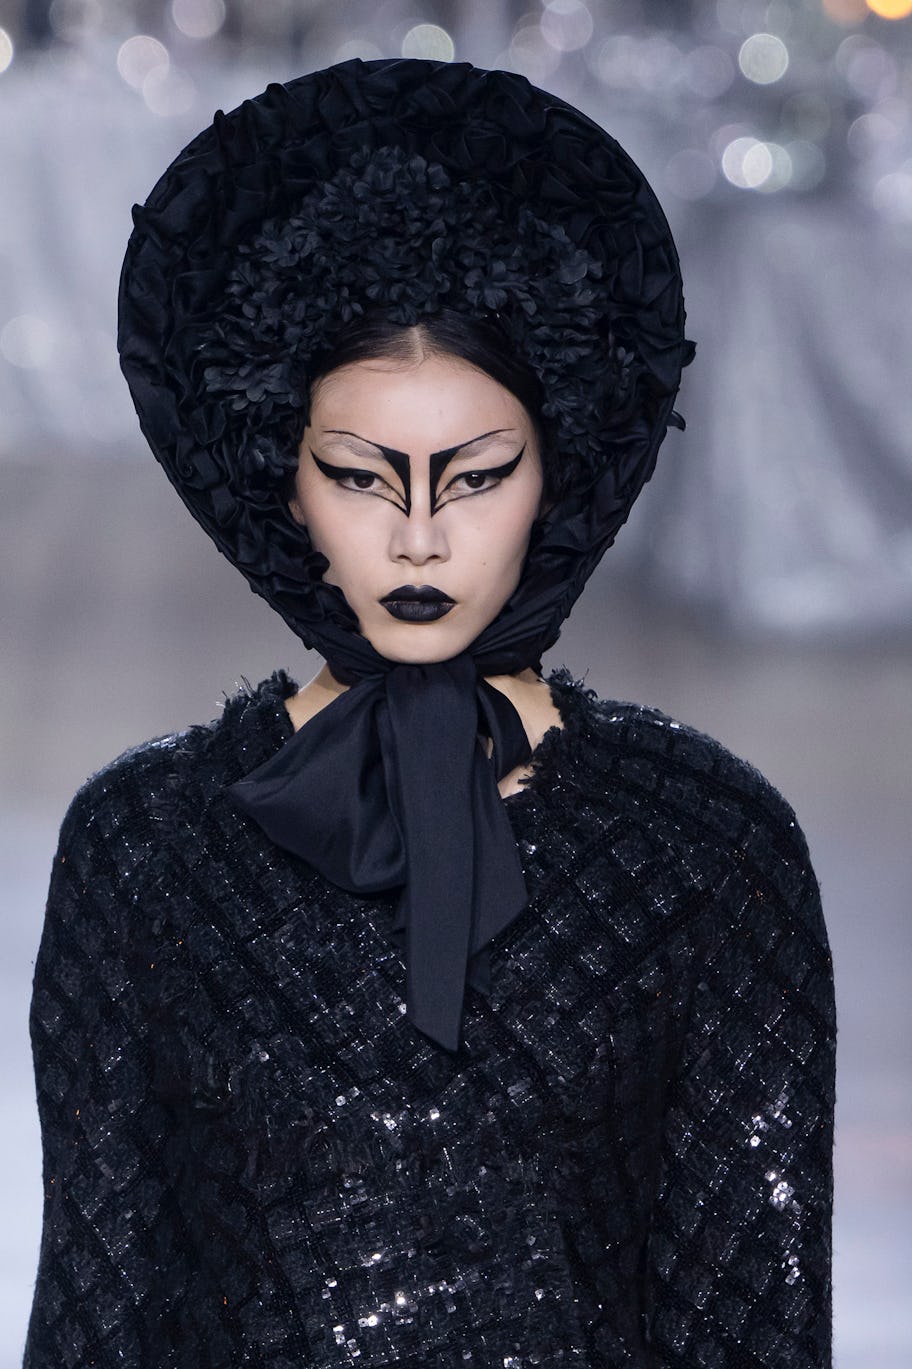 Goth-Meets-Balletcore Beauty Took Over New York Fashion Week